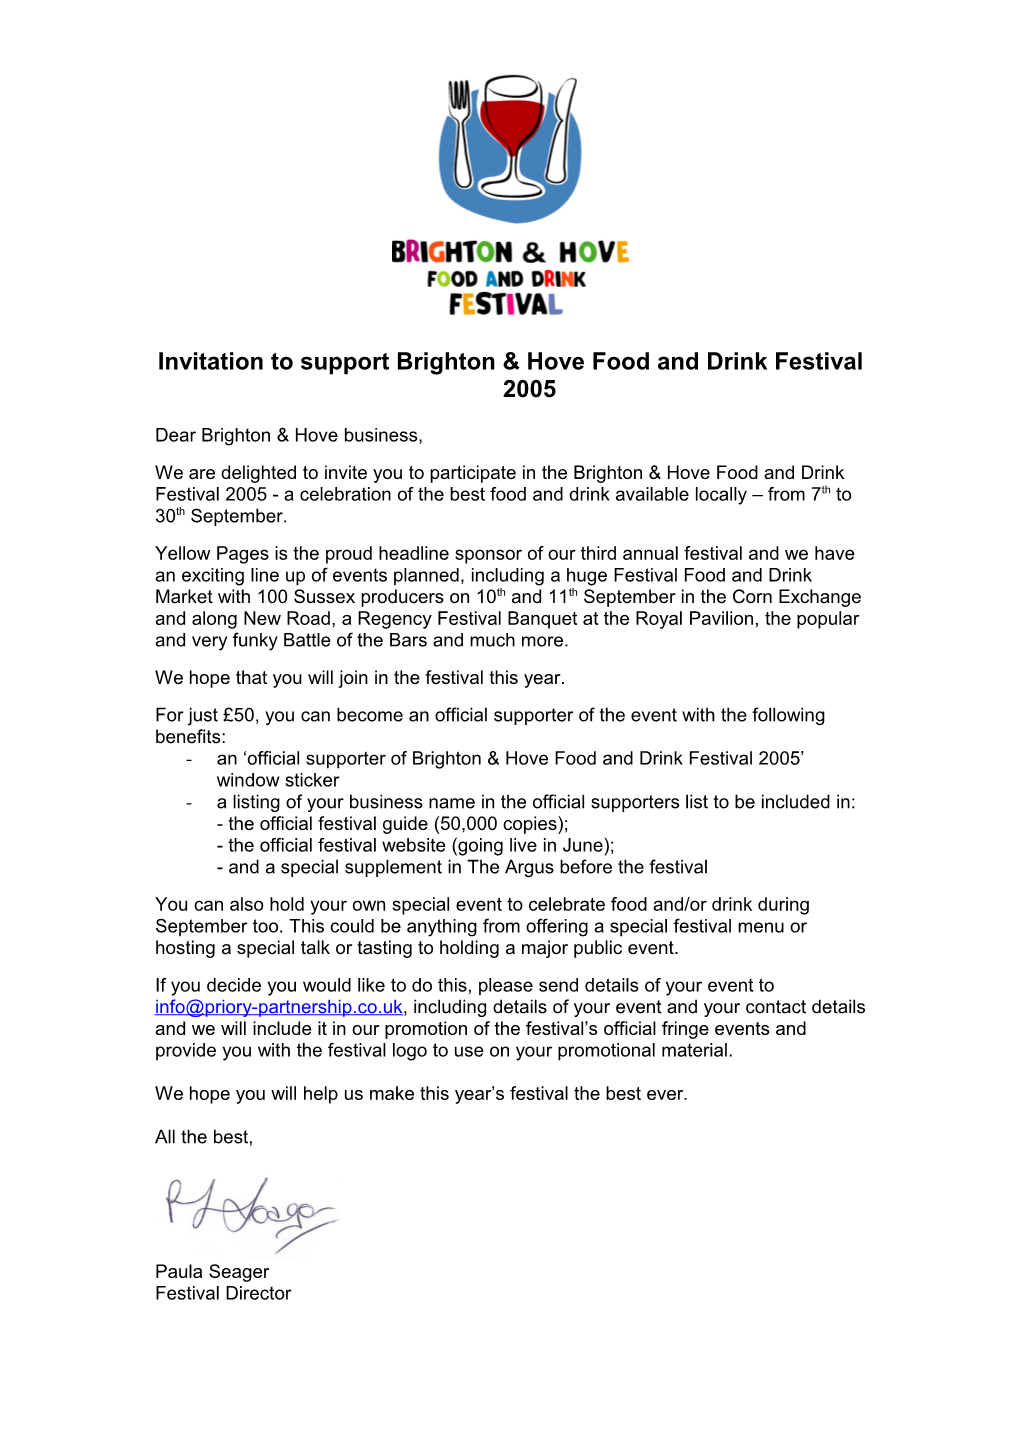 Invitation to Support Brighton & Hove Food and Drink Festival 2005